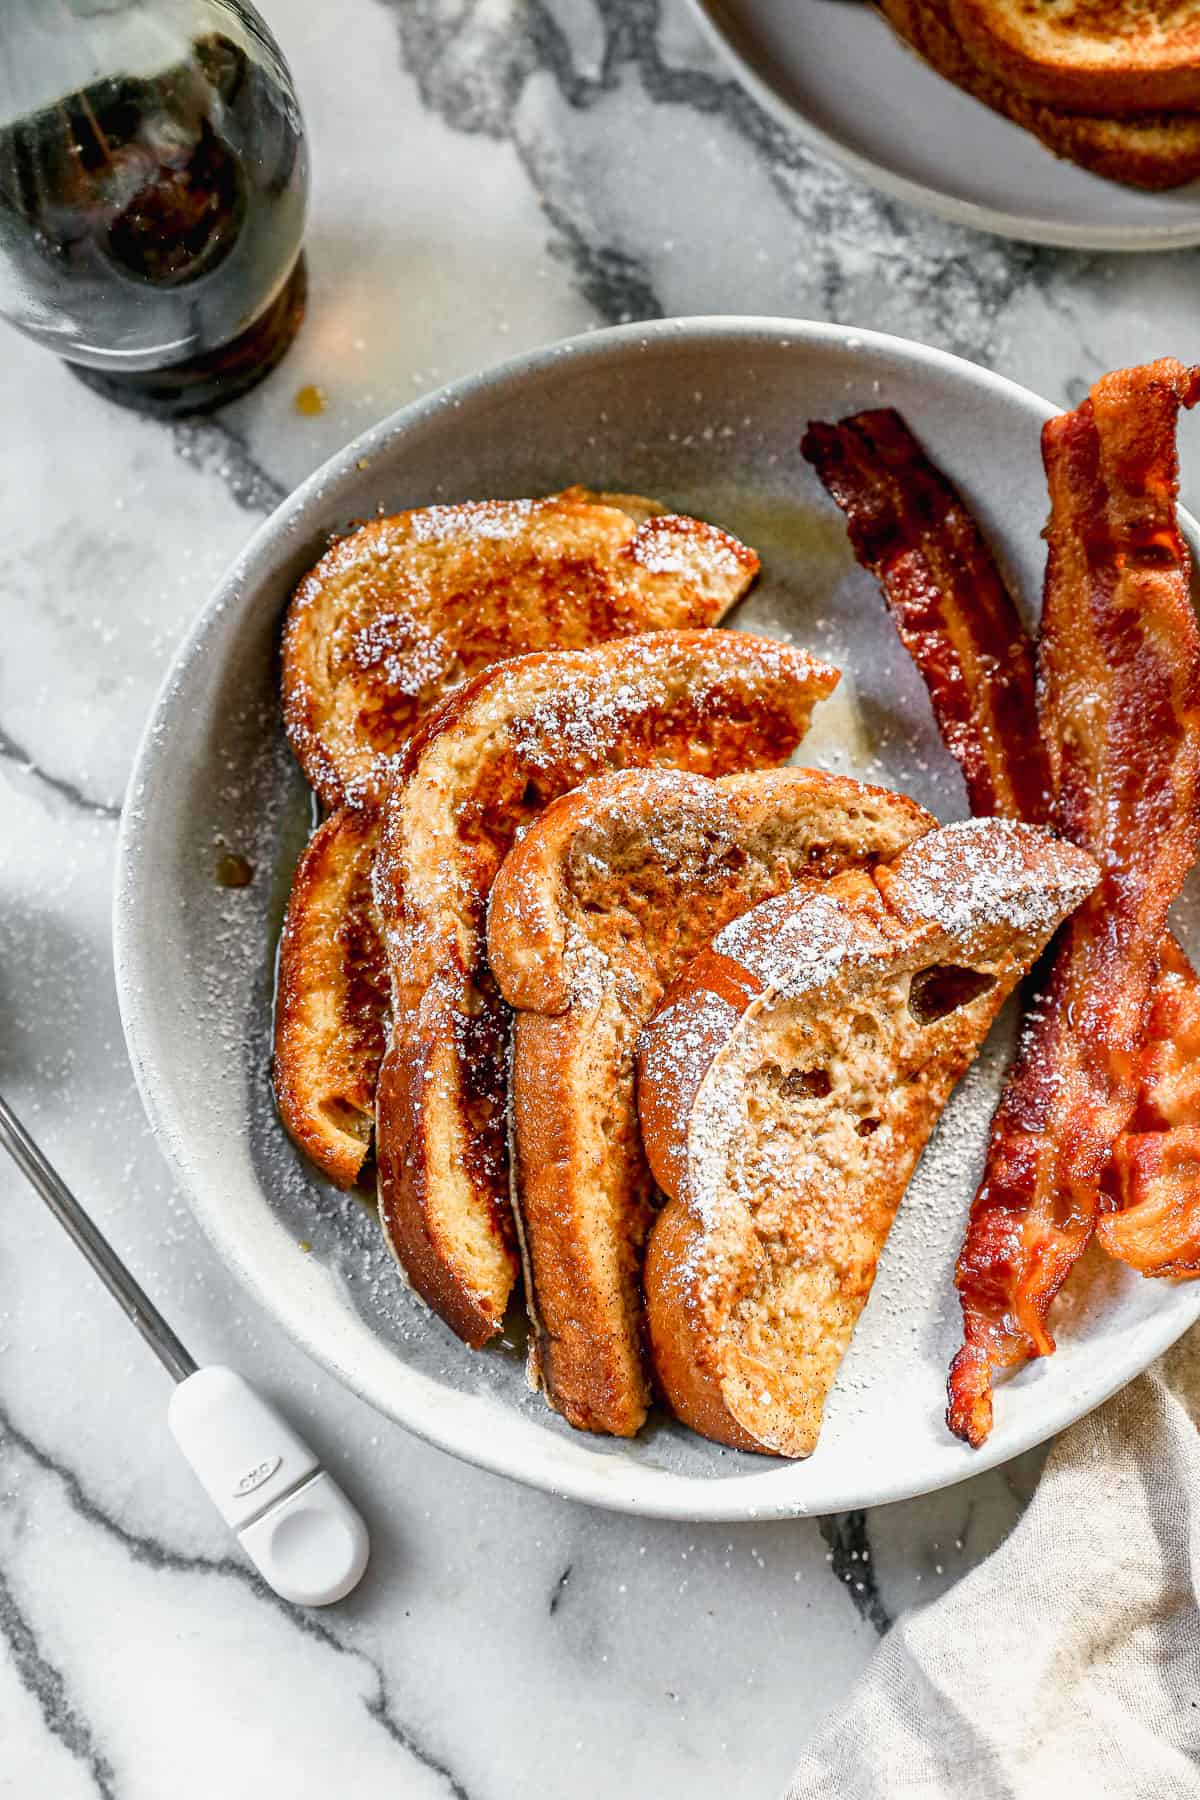 A plate with two slices of french toast cut in half with powdered sugar and syrup drizzled on top, next to two slices of bacon.